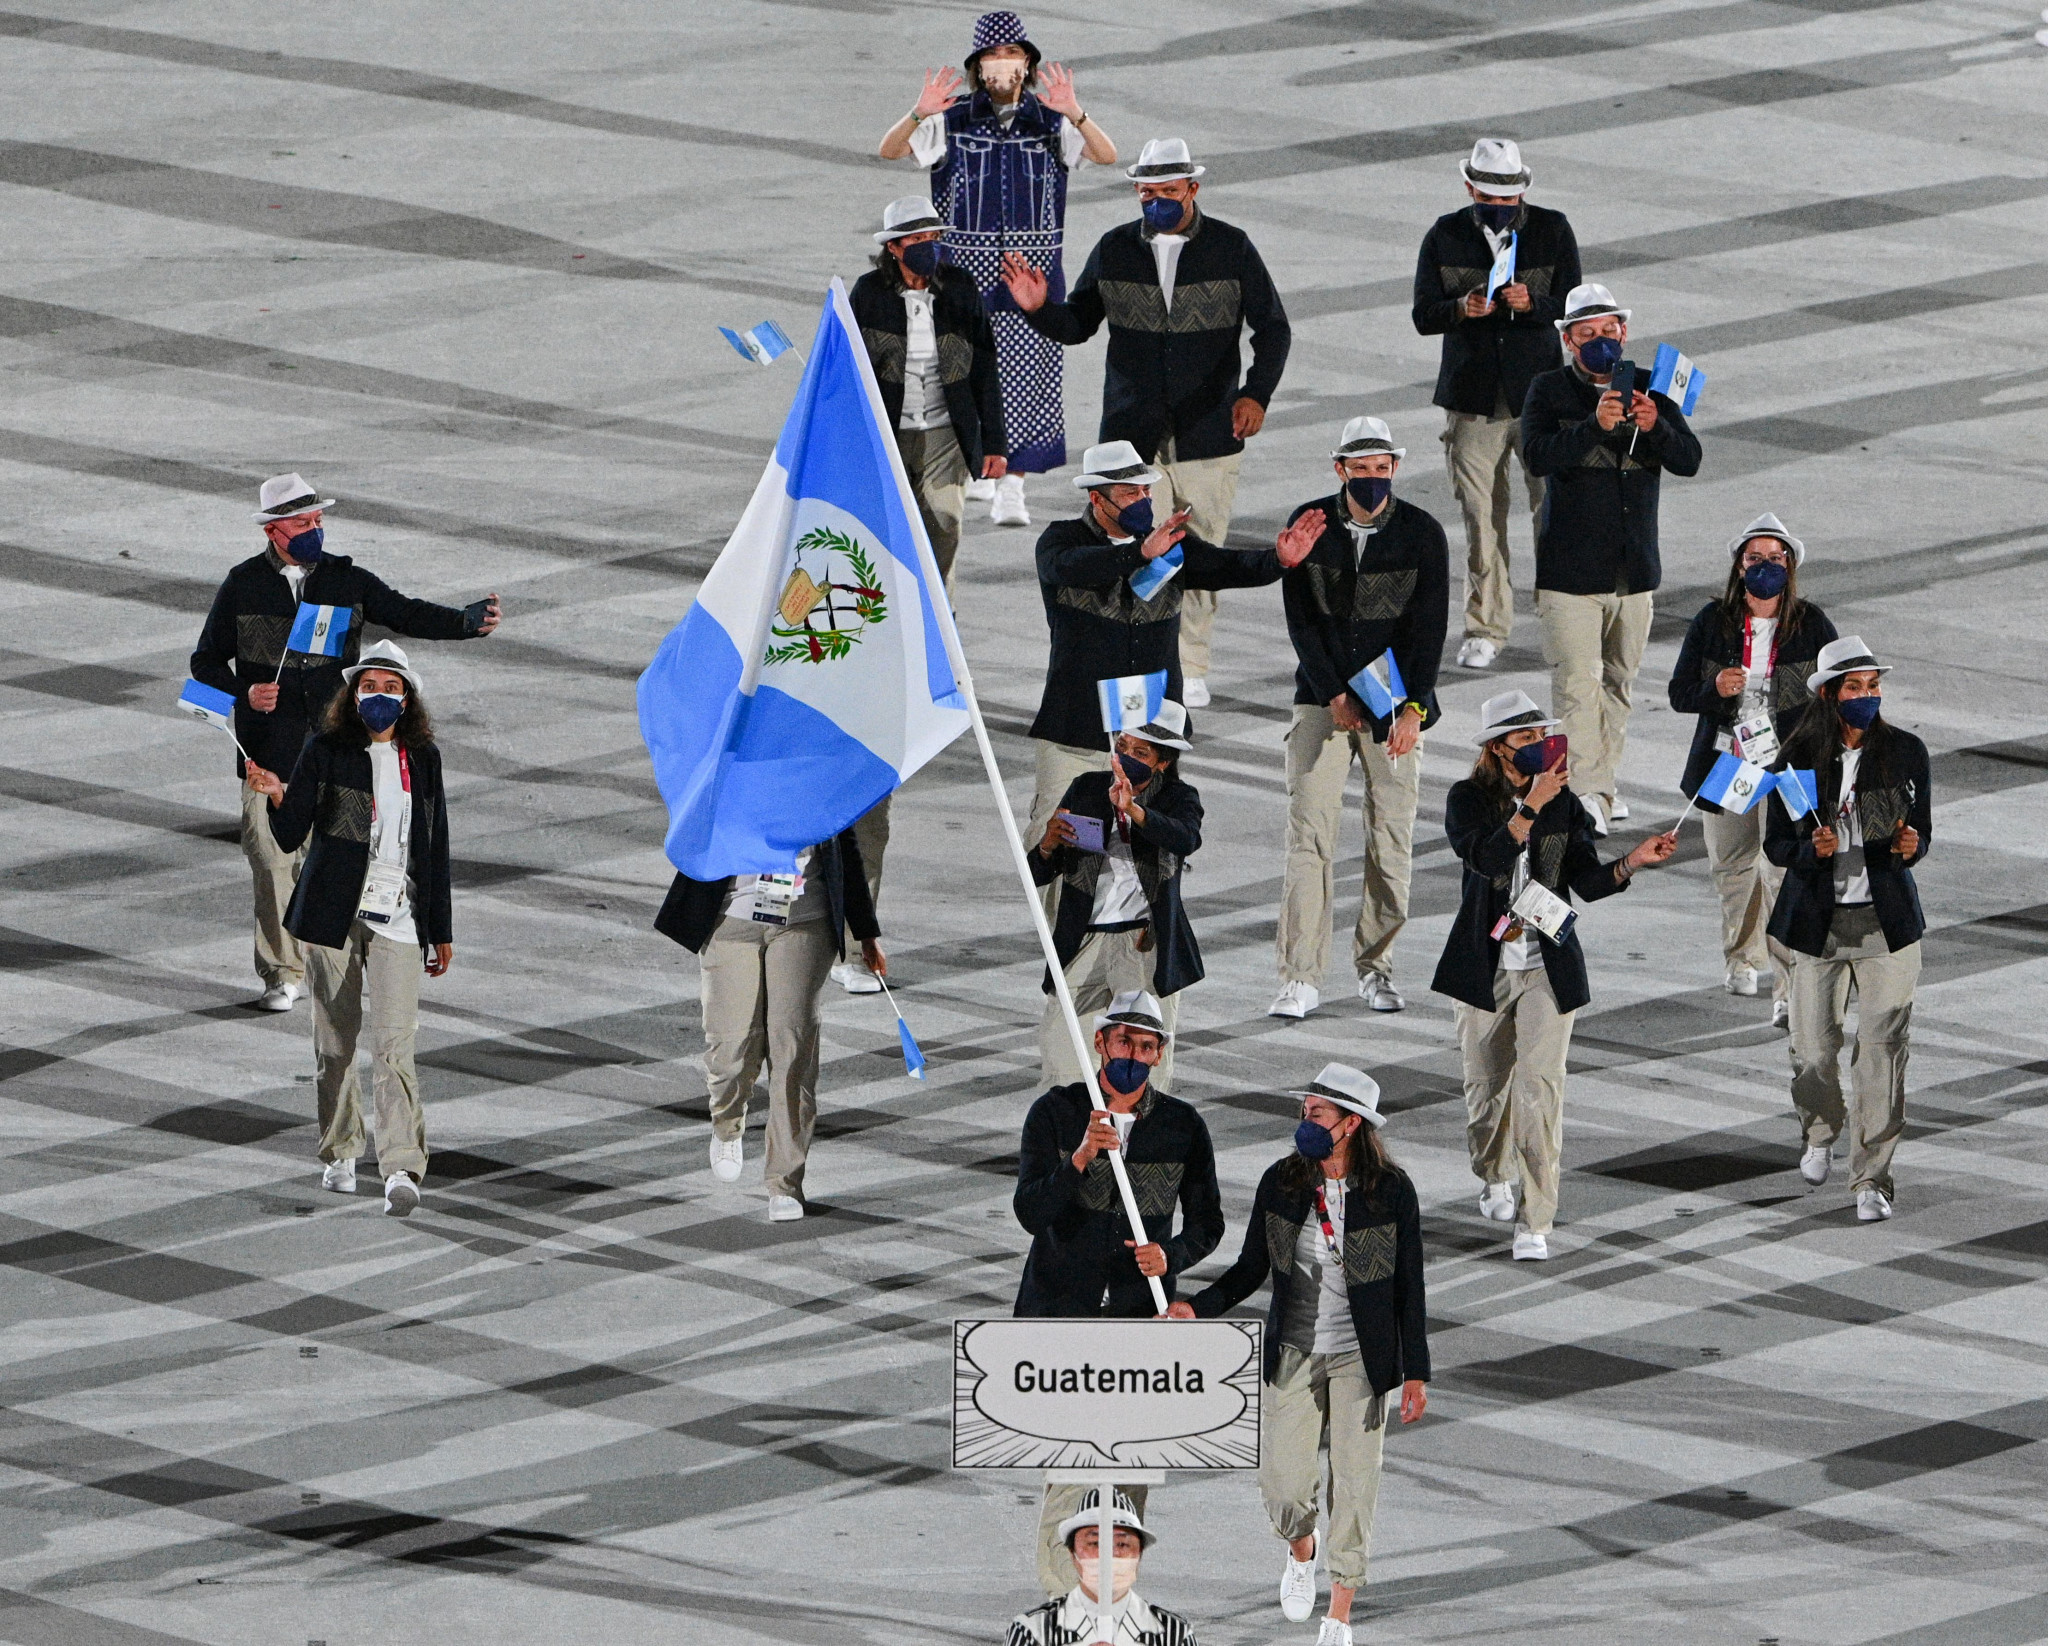 The Guatemalan Olympic Committee has lost its right to operate as an NOC ©Getty Images